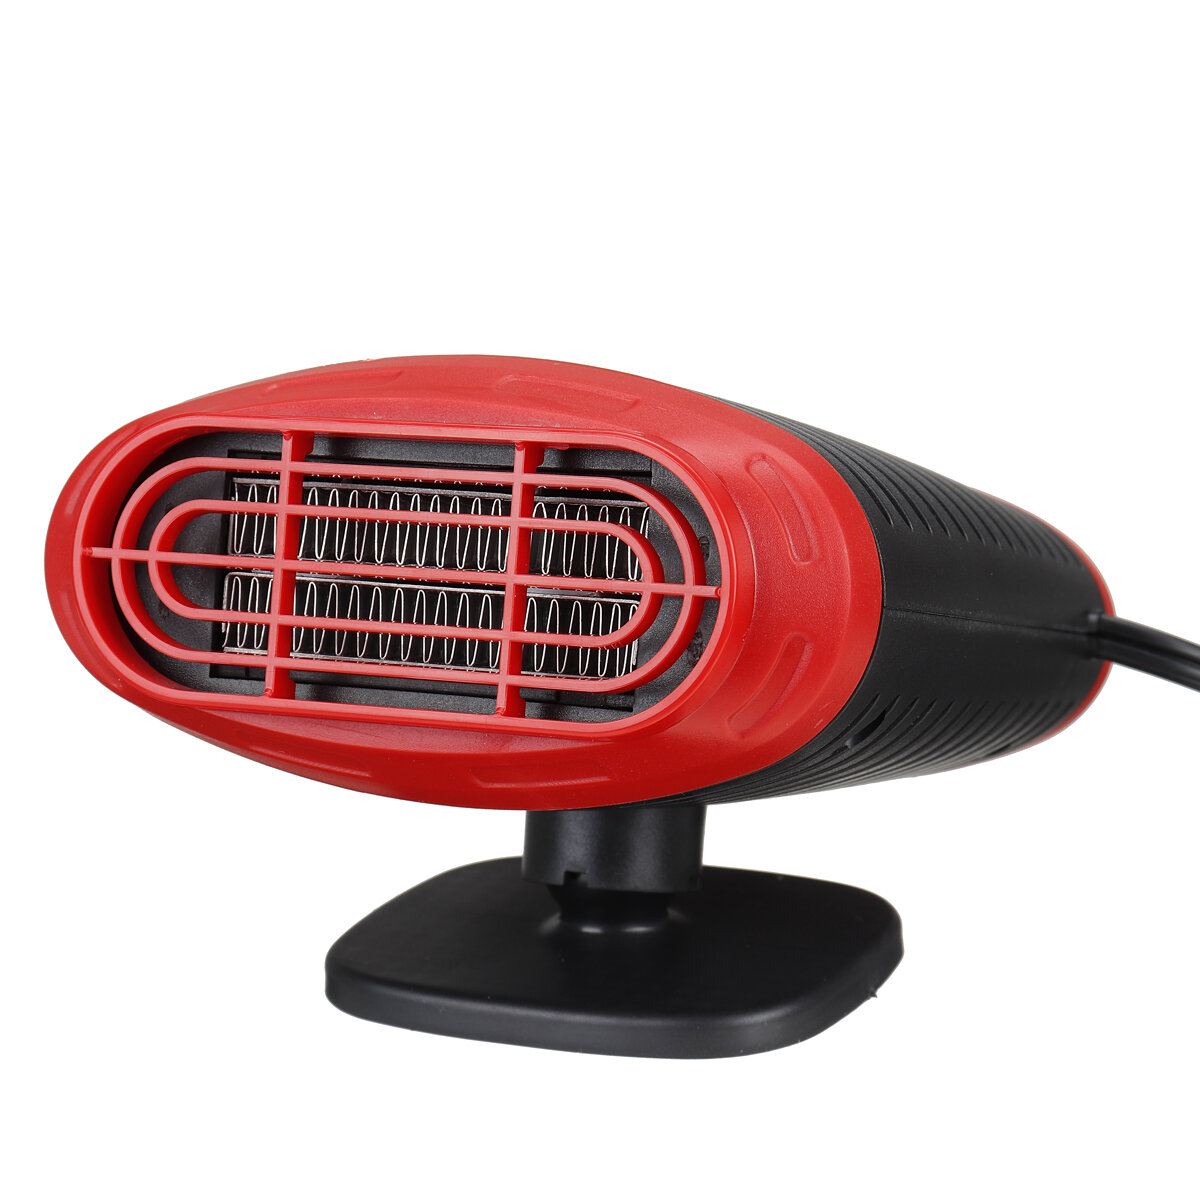 

12V 150W Portable Auto Car Heater Defroster Demister Electric Heater Windshield Heating Cooling Fan Car Mist Remover